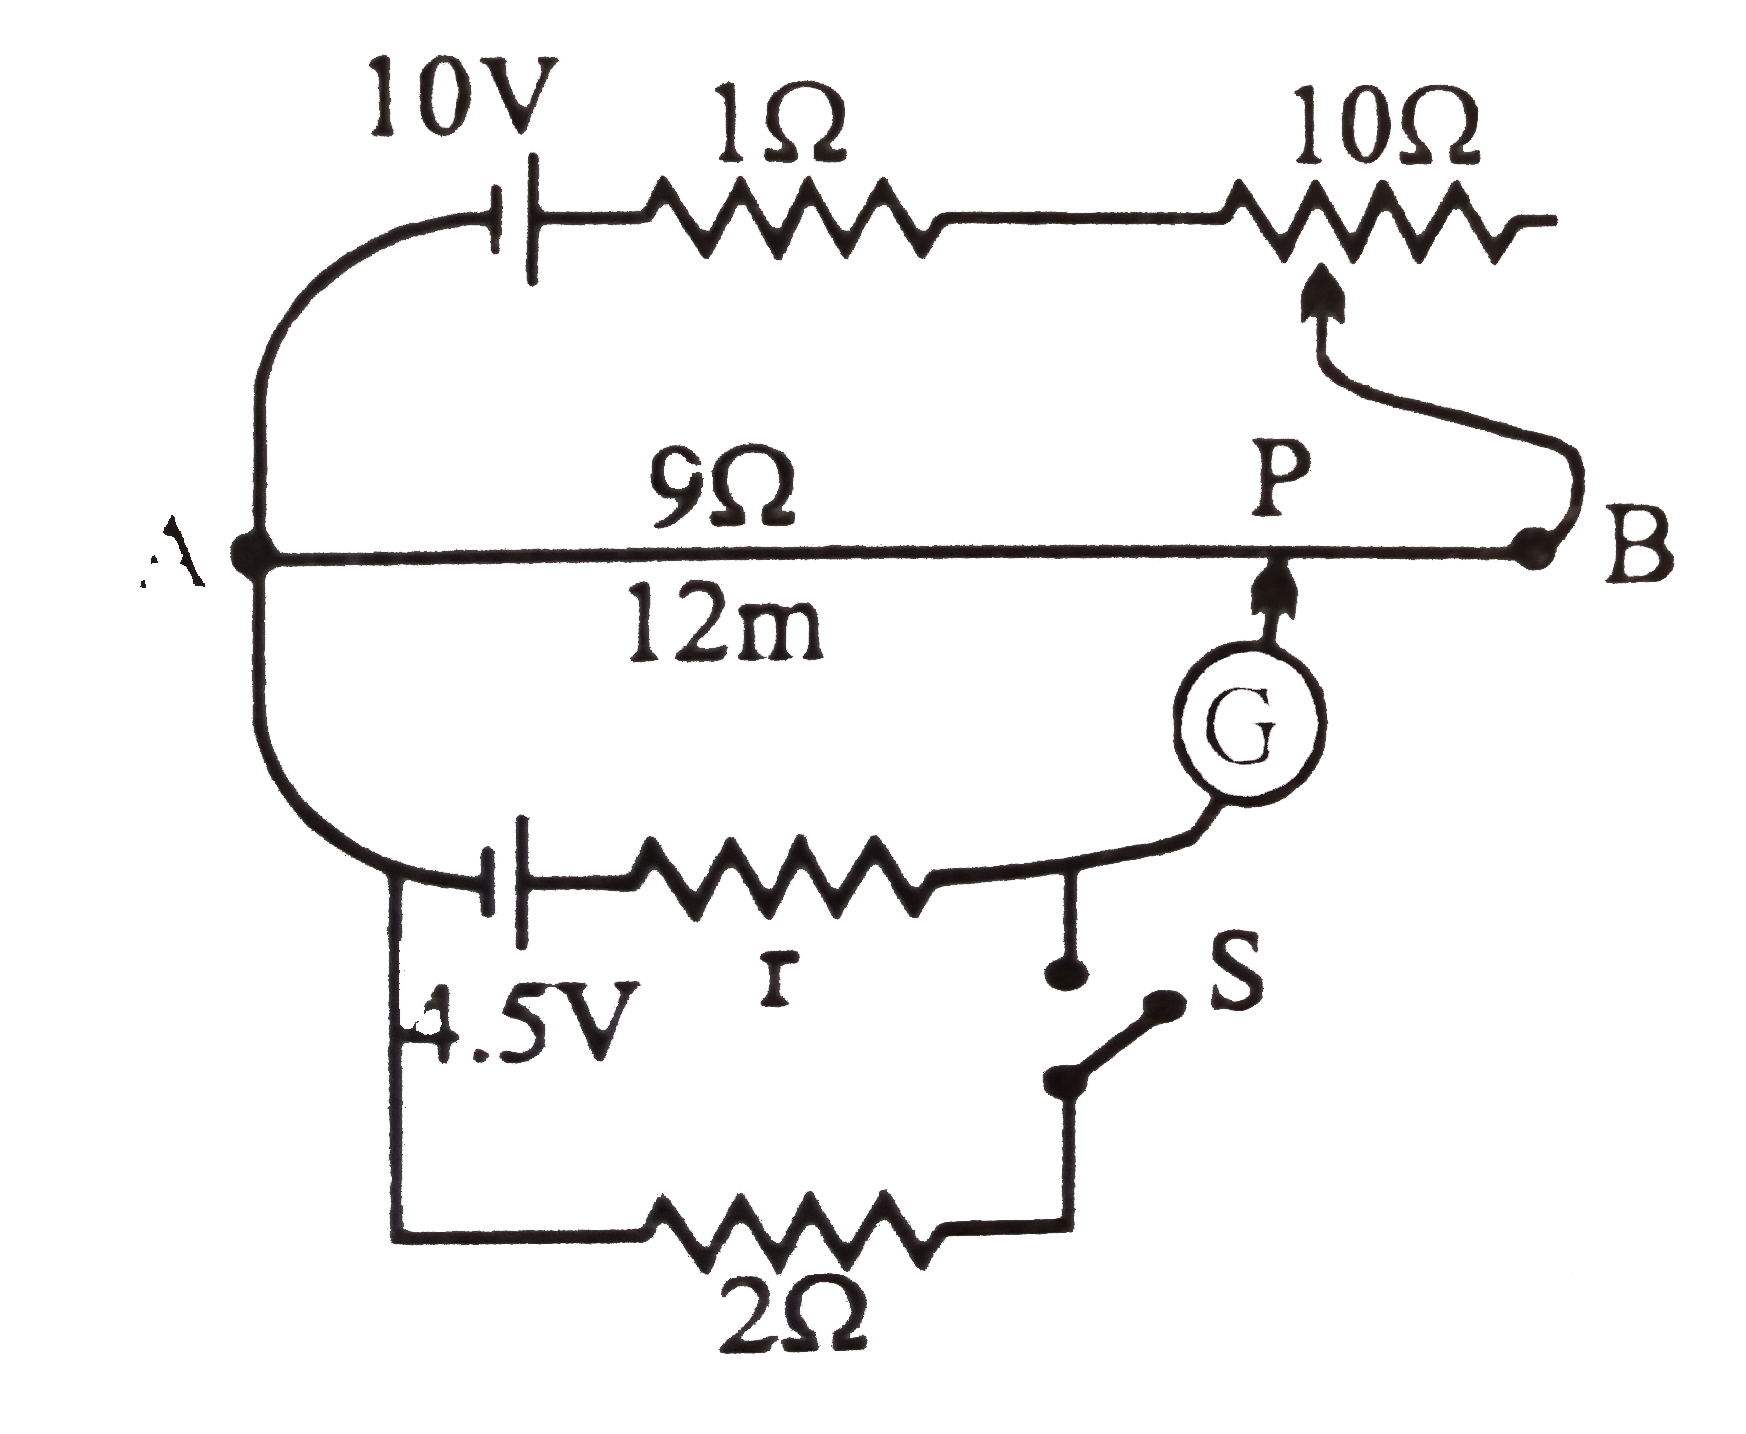 In the primary circuit of potentiometer the rheostat can be varied from 0 to 10Omega. Initially it is at minimum resistance (zero).      (a) Find the length AP of the wire such that the galvanometer shows zero deflection.   (b) Now the rheostat is put at maximum resistance (10Omega) and the switch S is closed. New balancing length is found to 8m. Find the internal resistance r of the 4.5V cell.